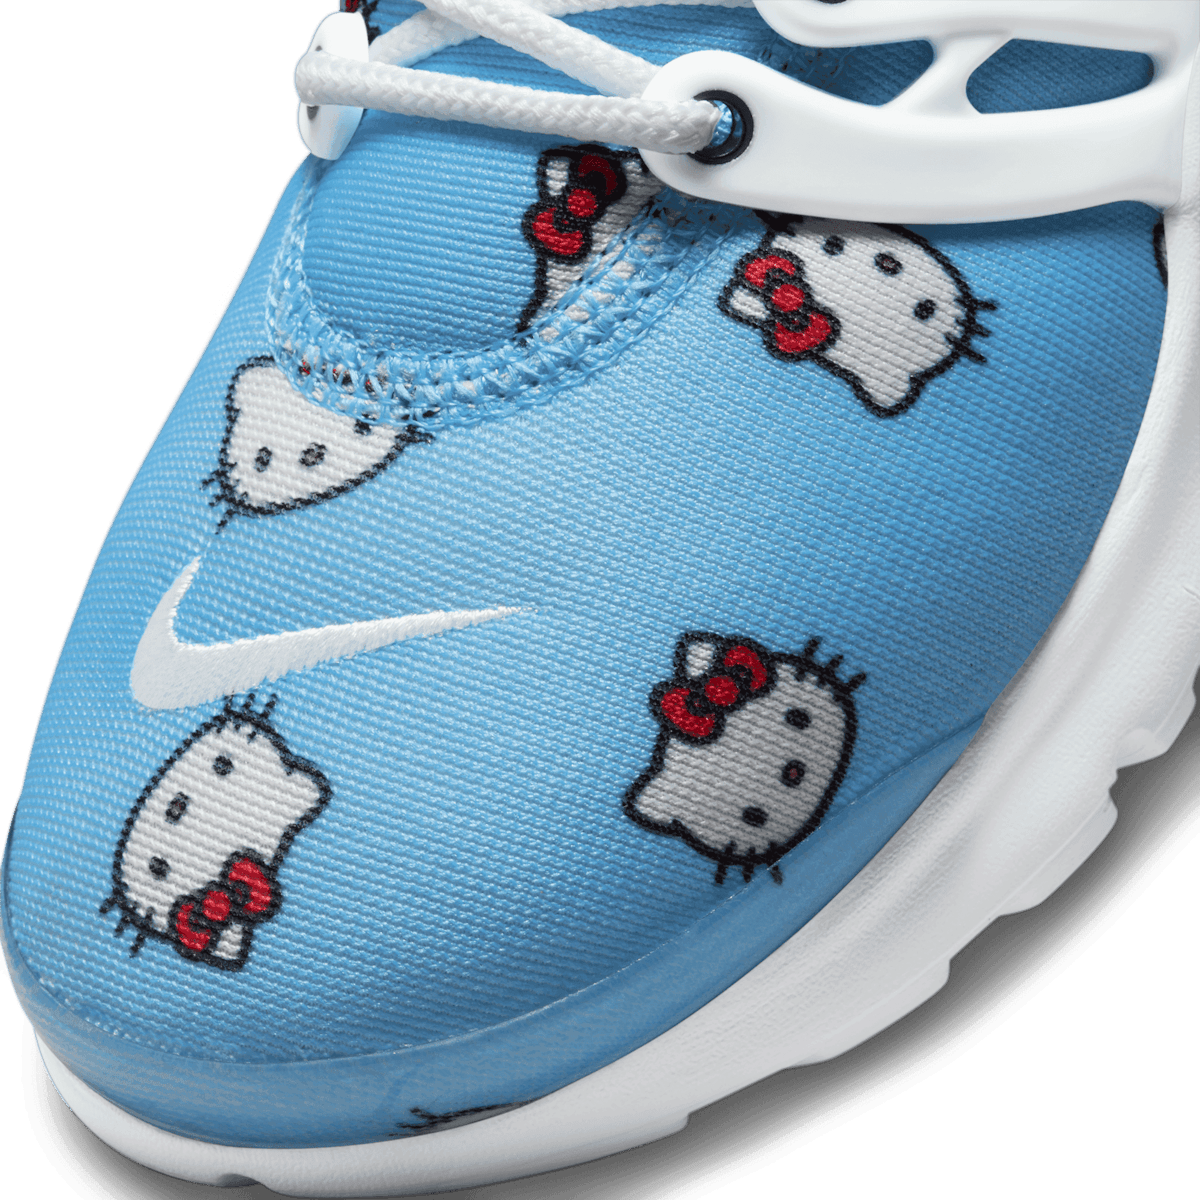 Nike Air Presto Hello Kitty - DH7780-402 Raffles and Release Date